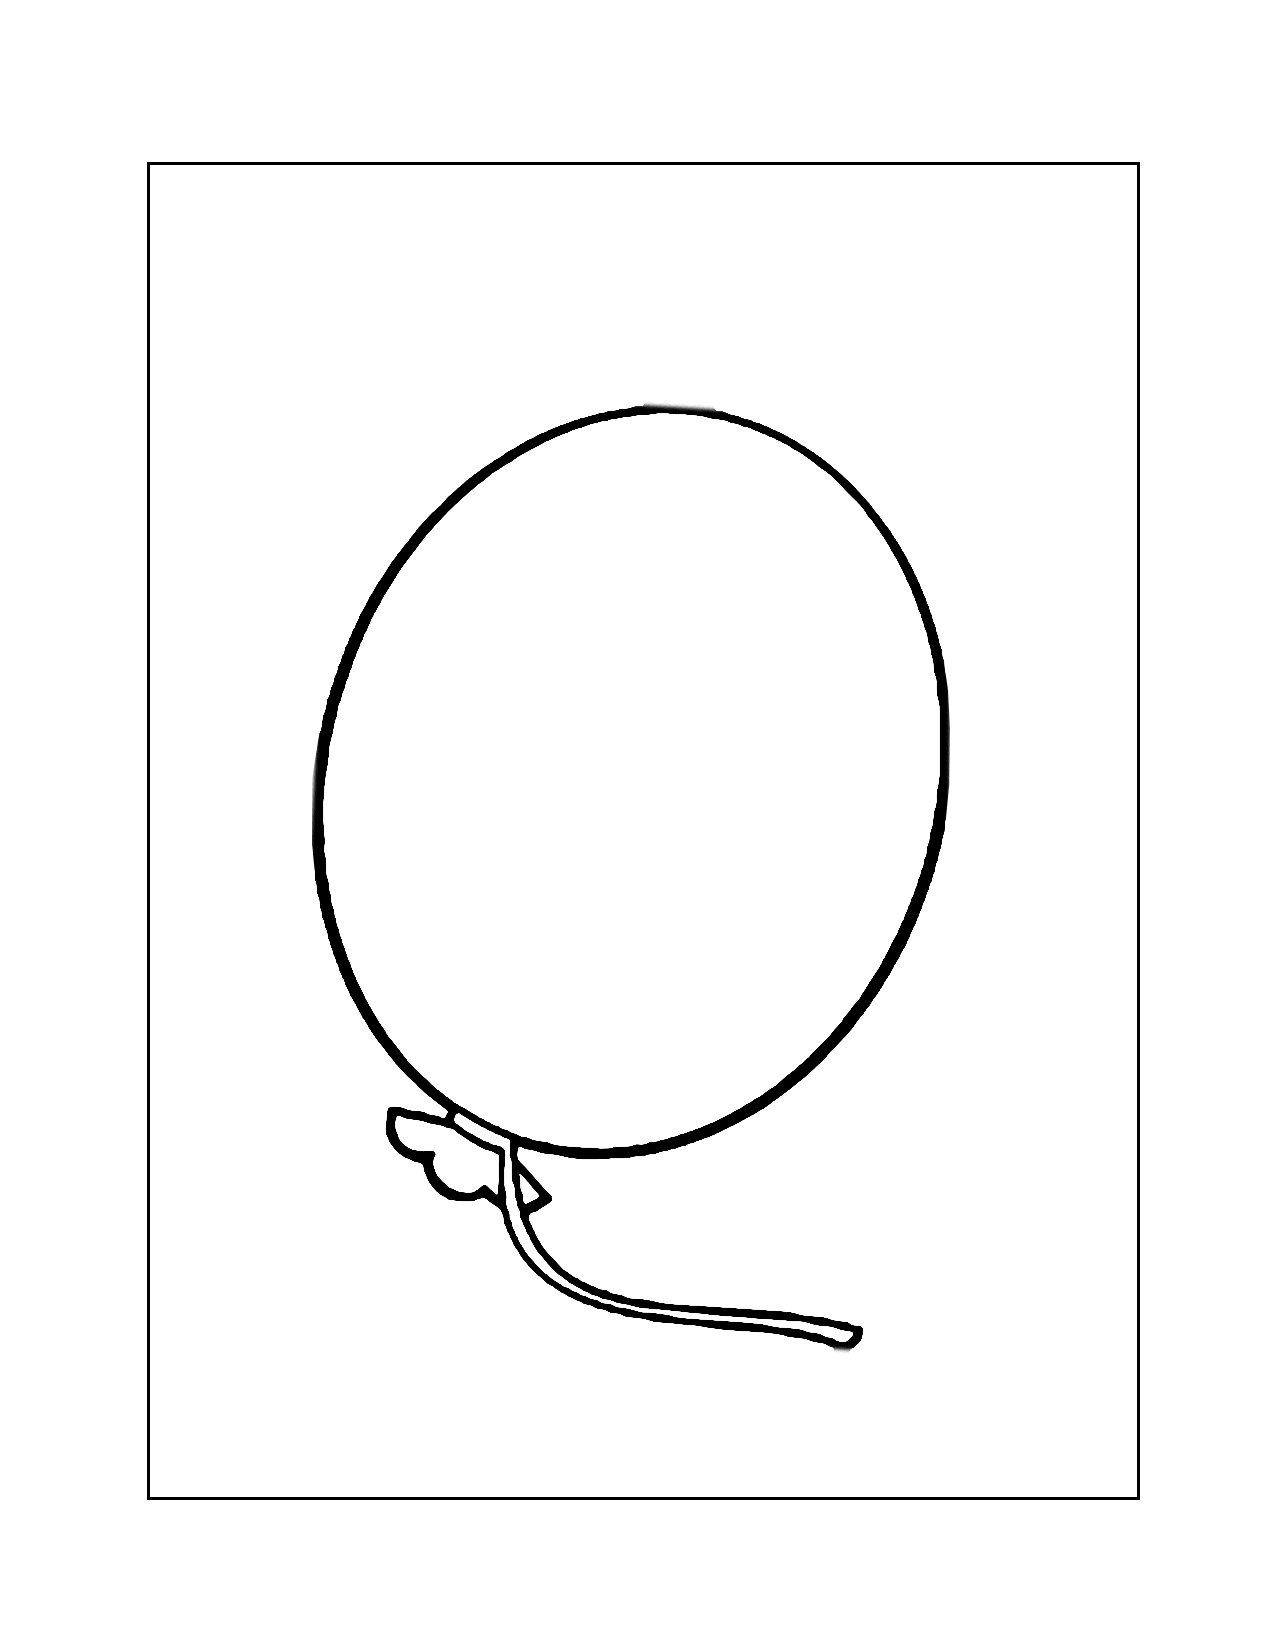 Easy Balloon Coloring Page